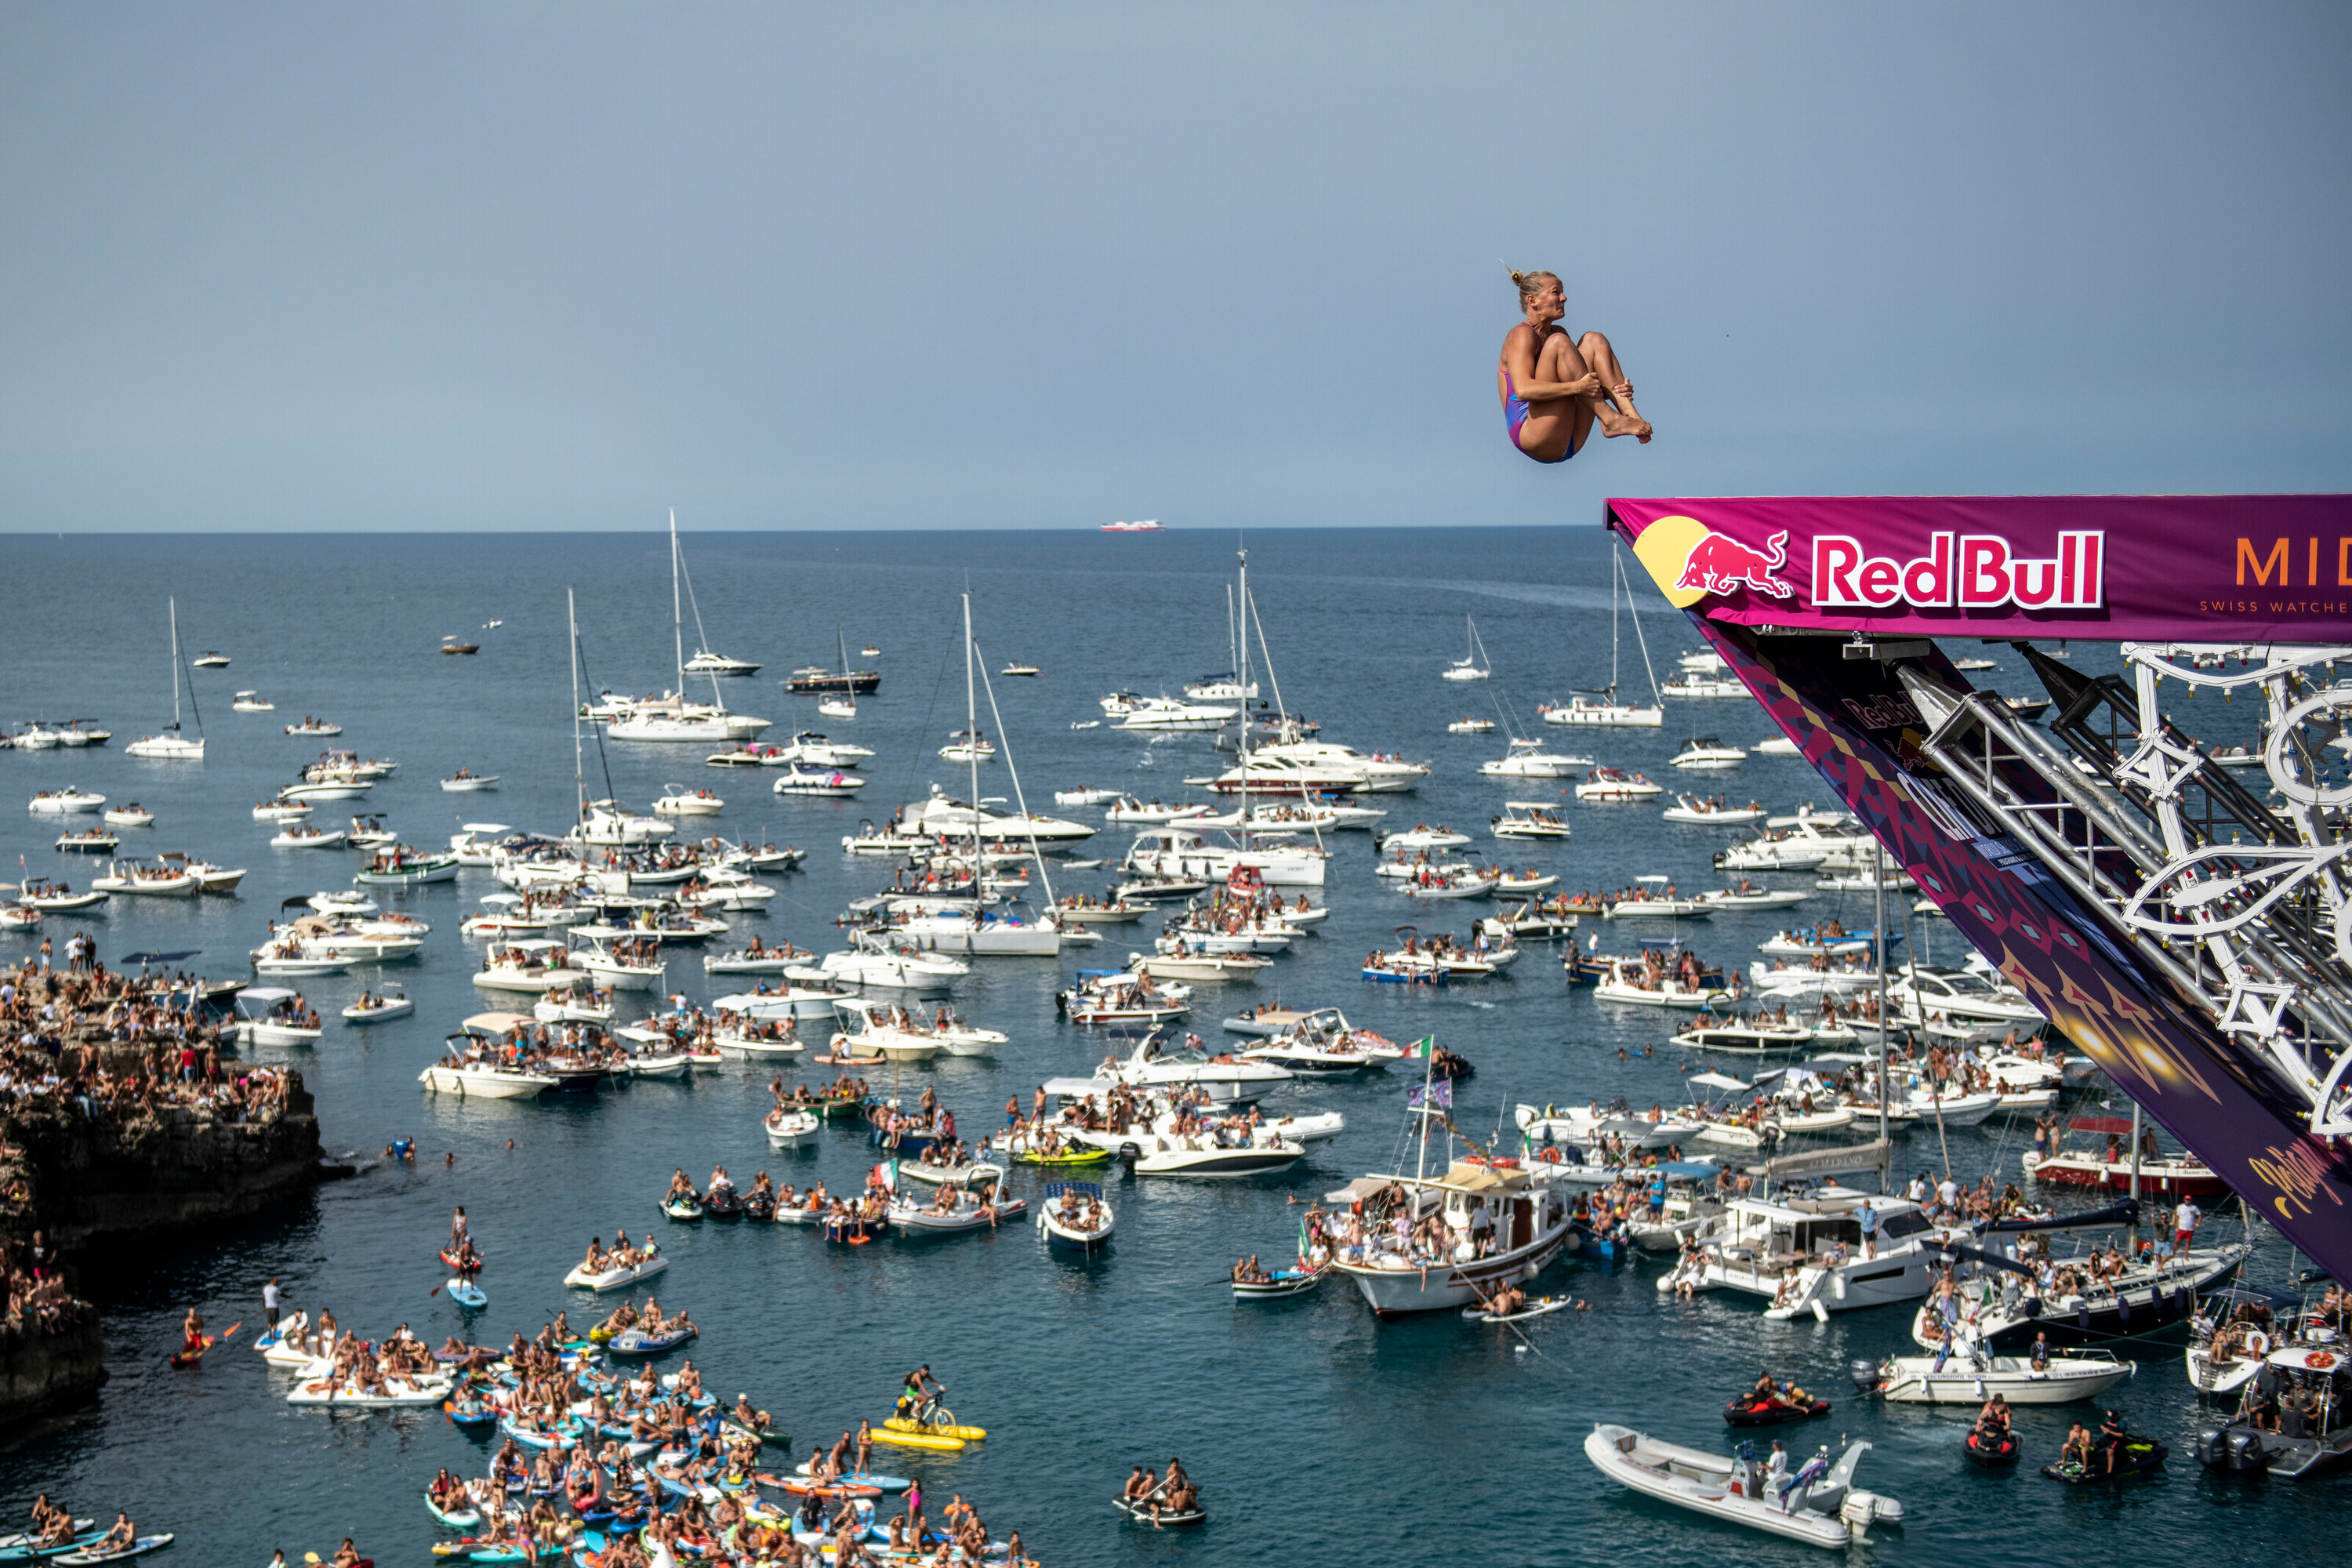 The Red Bull Cliff Diving World Series is coming to Sydney for the